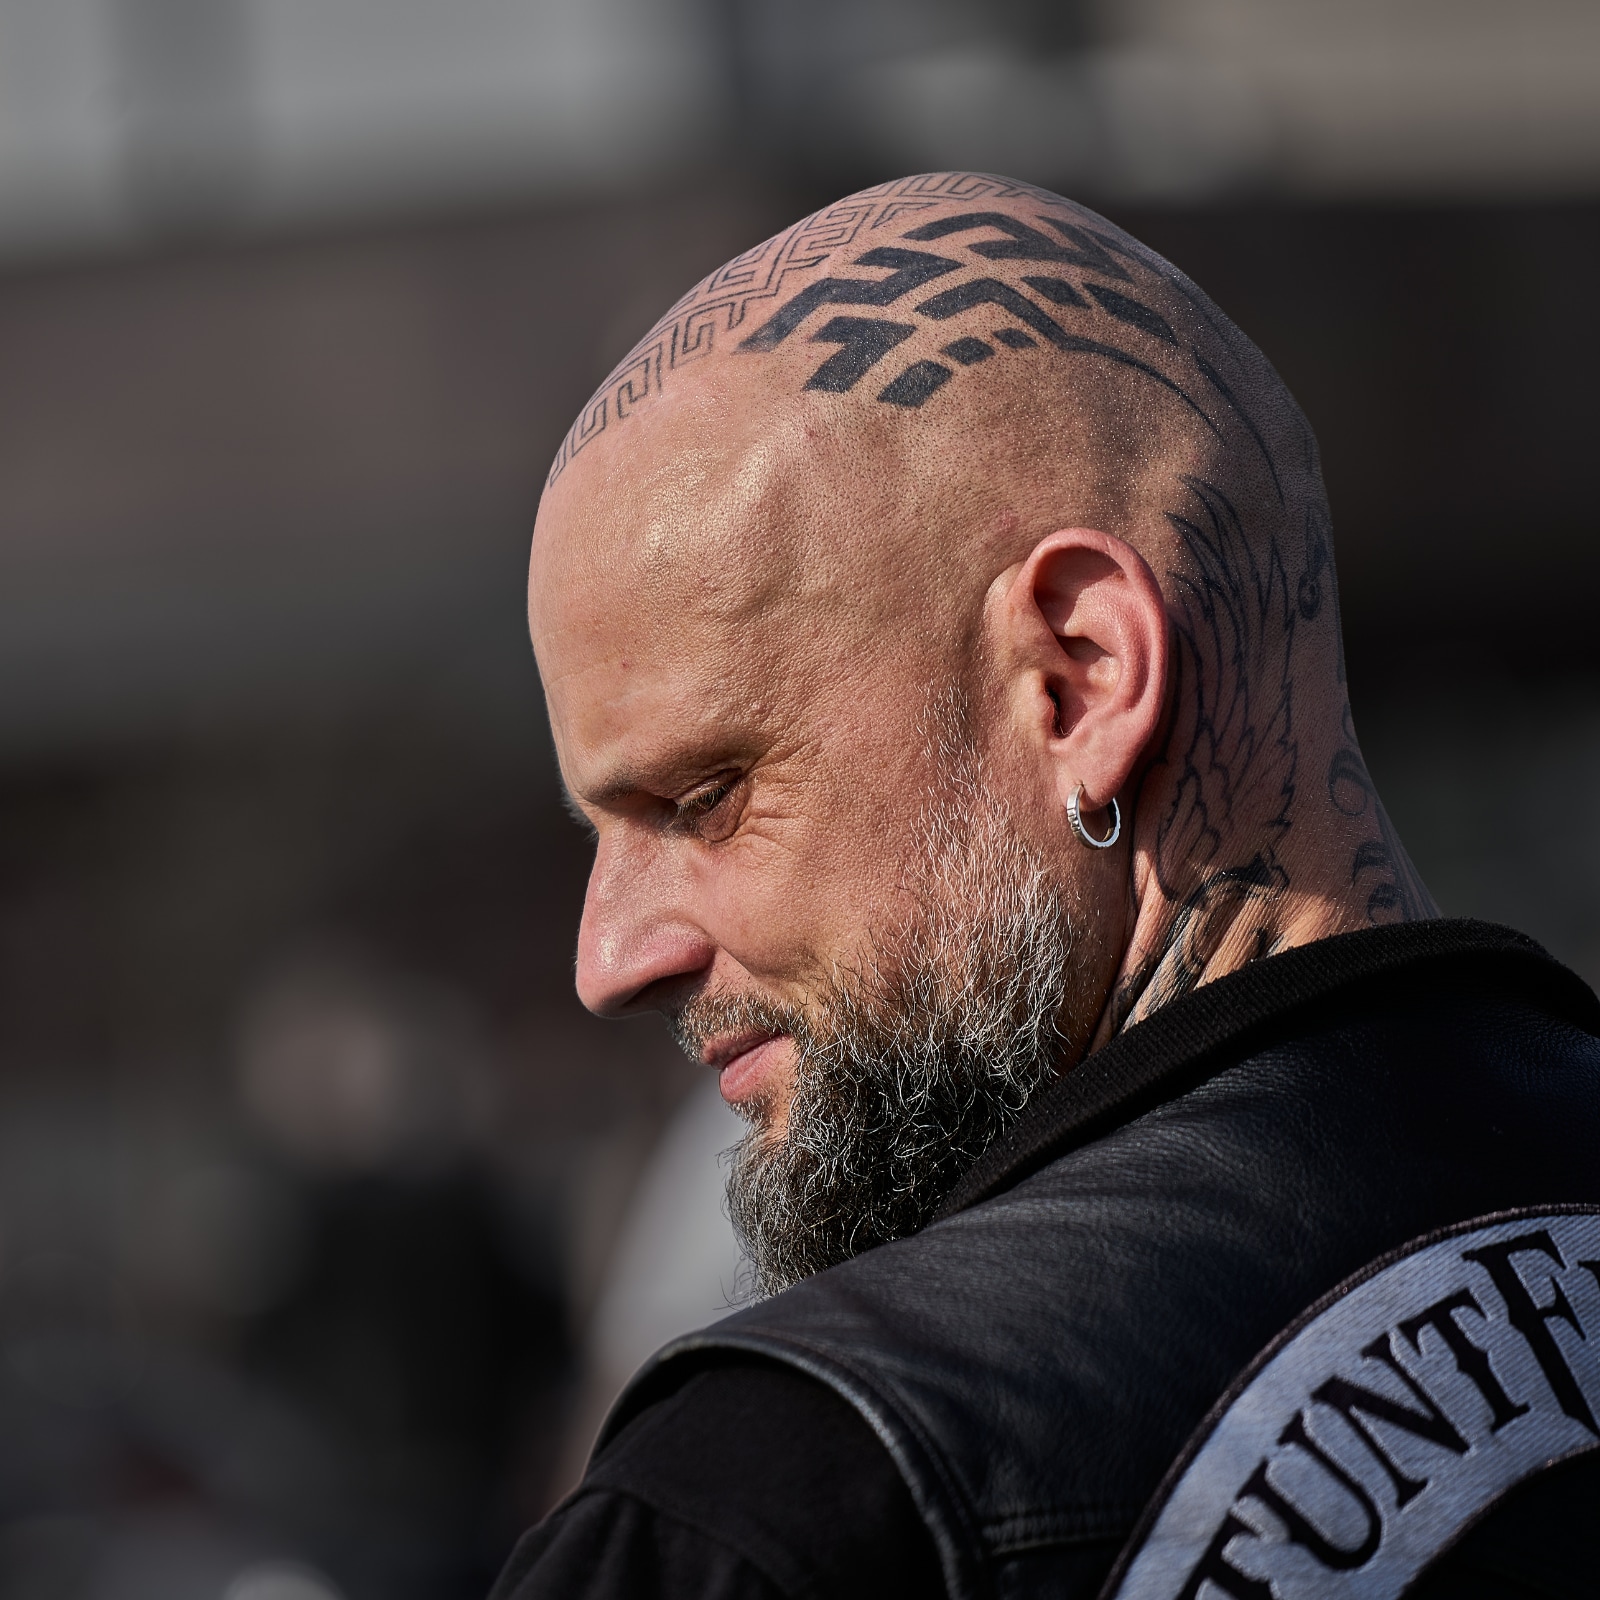 Hair Tattoos  Everything You Need To Know  The Bald Company